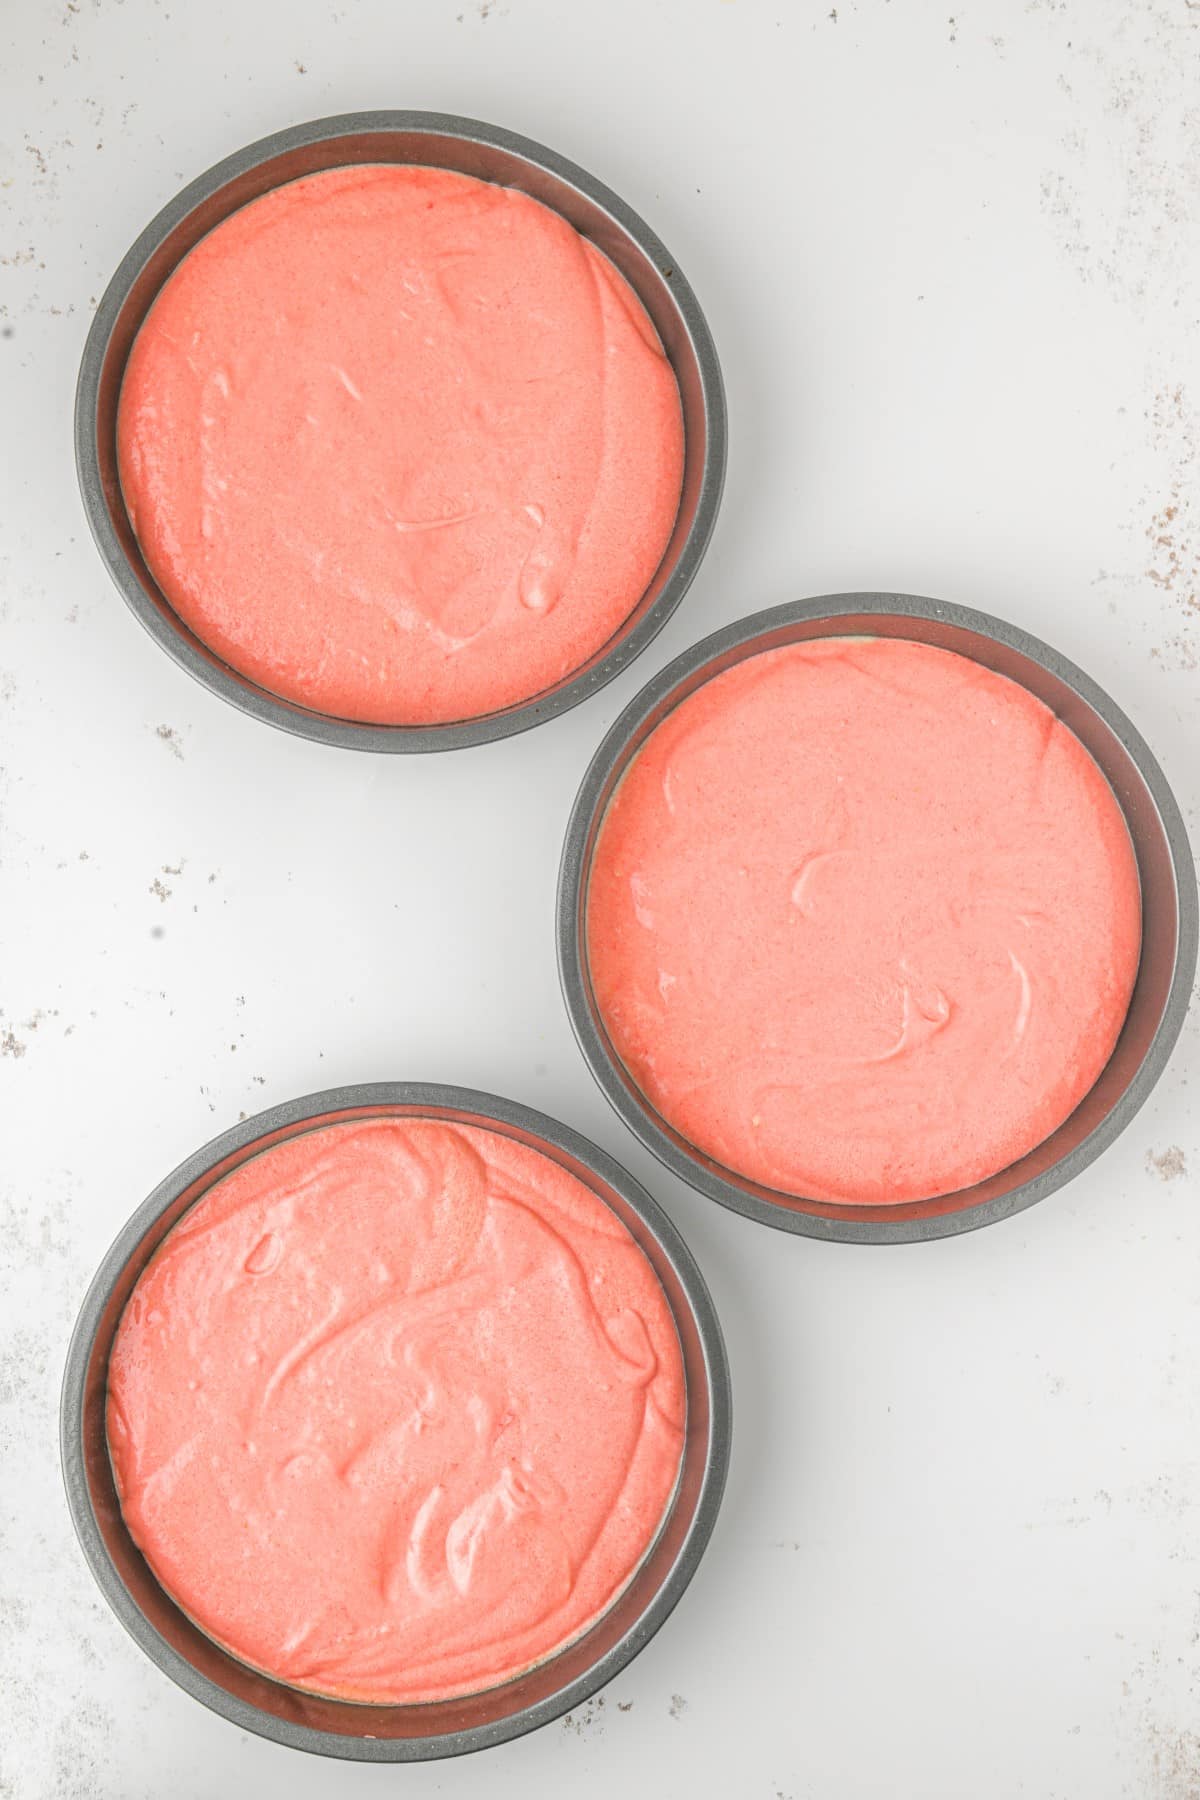 The round cake pans filled with batter. 